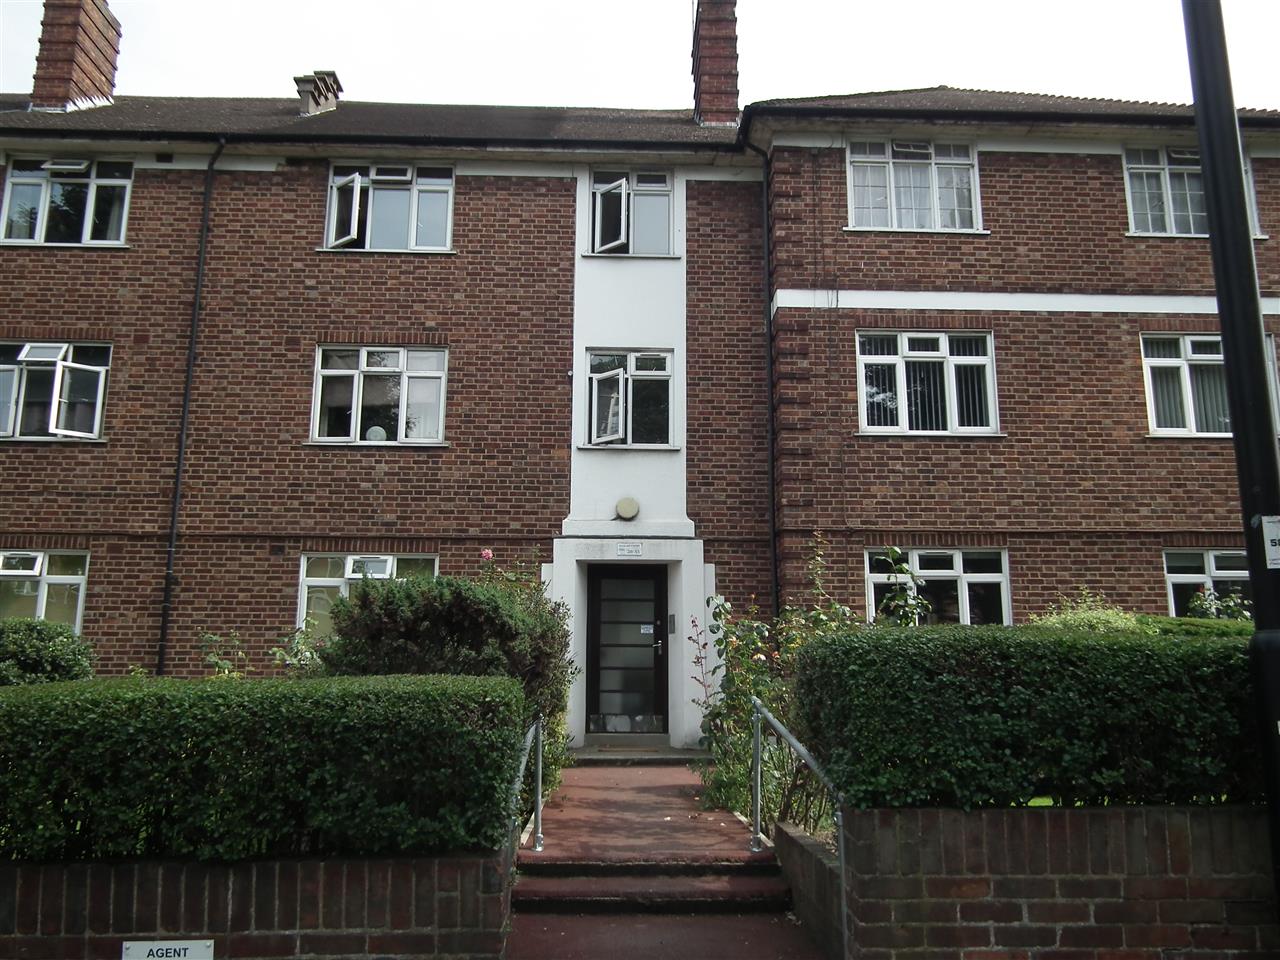 AVAILABLE IMMEDIATELY-RENT FIXED FOR 2 YEARS & WITH DEPOSIT-FREE OPTION!<BR>Well proportioned ground floor recently redecorated UNFURNISHED flat on the Southgate/Arnos Grove borders with well maintained communal gardens. The accommodation comprises three bedrooms (two doubles), reception room ...